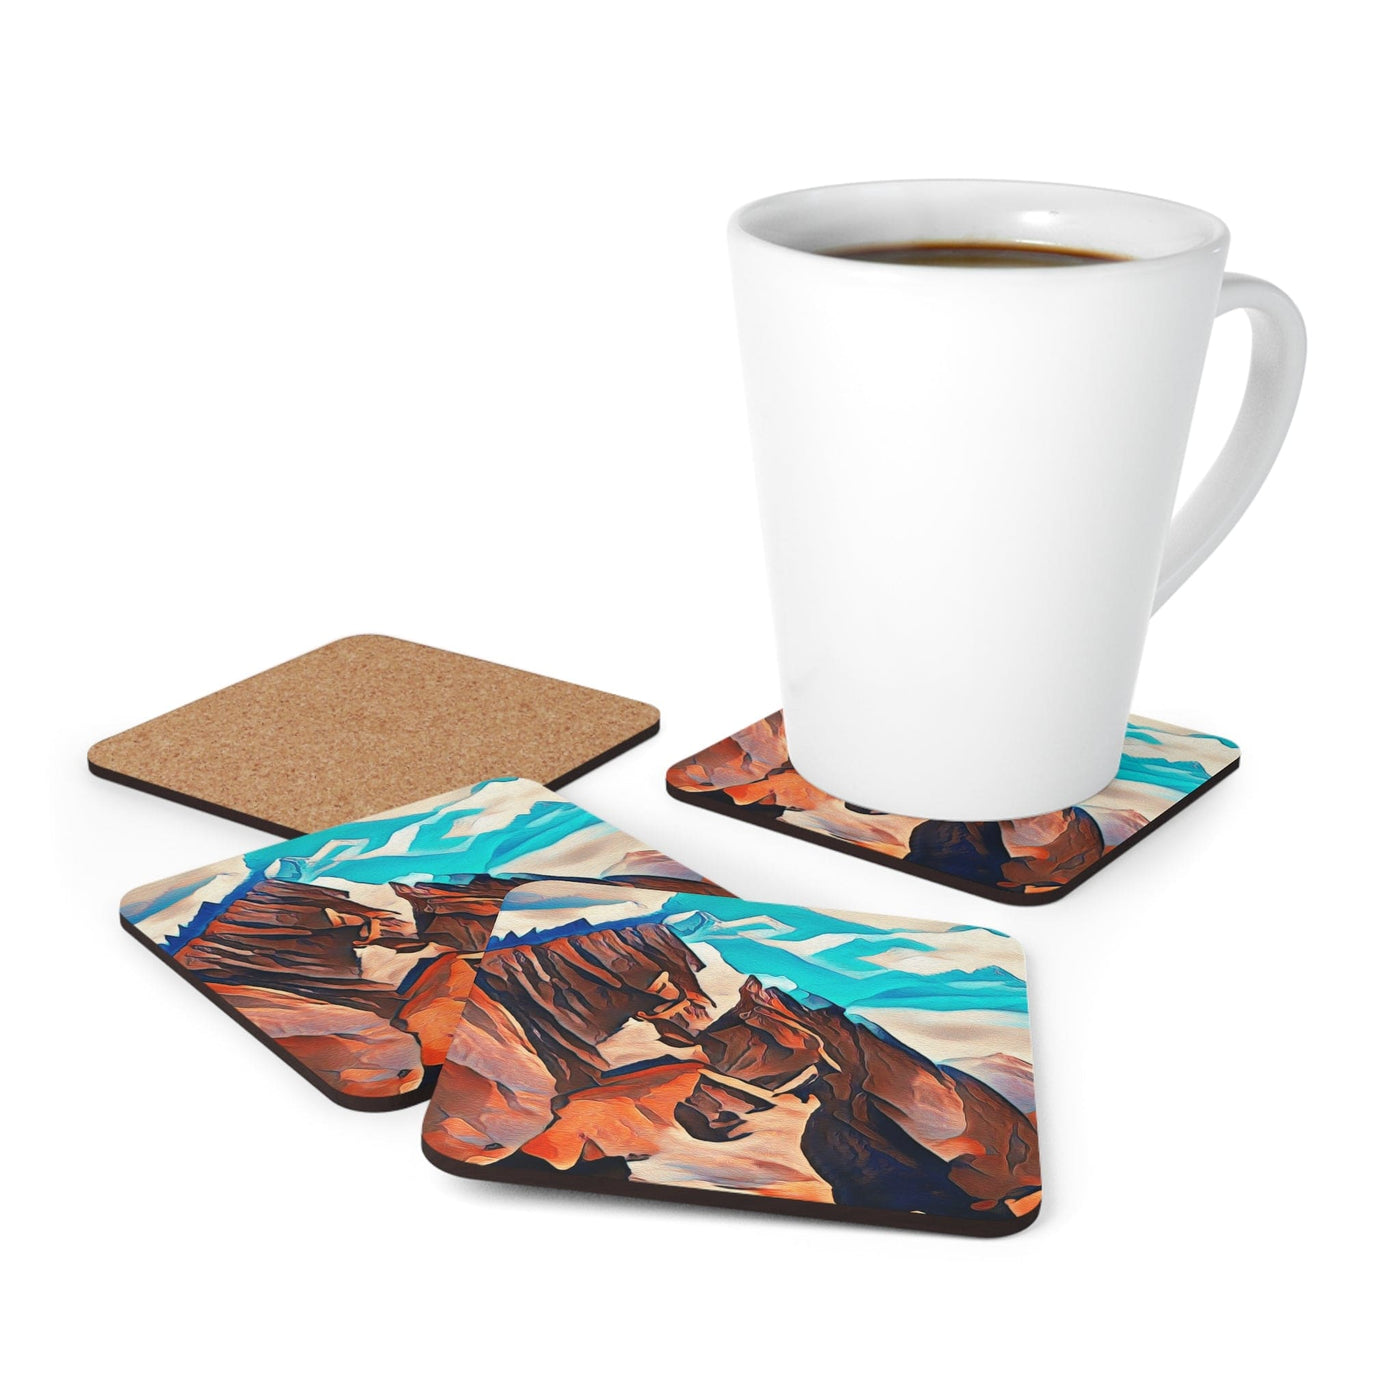 Coaster Set Of 4 For Drinks Brown Horses - Decorative | Coasters